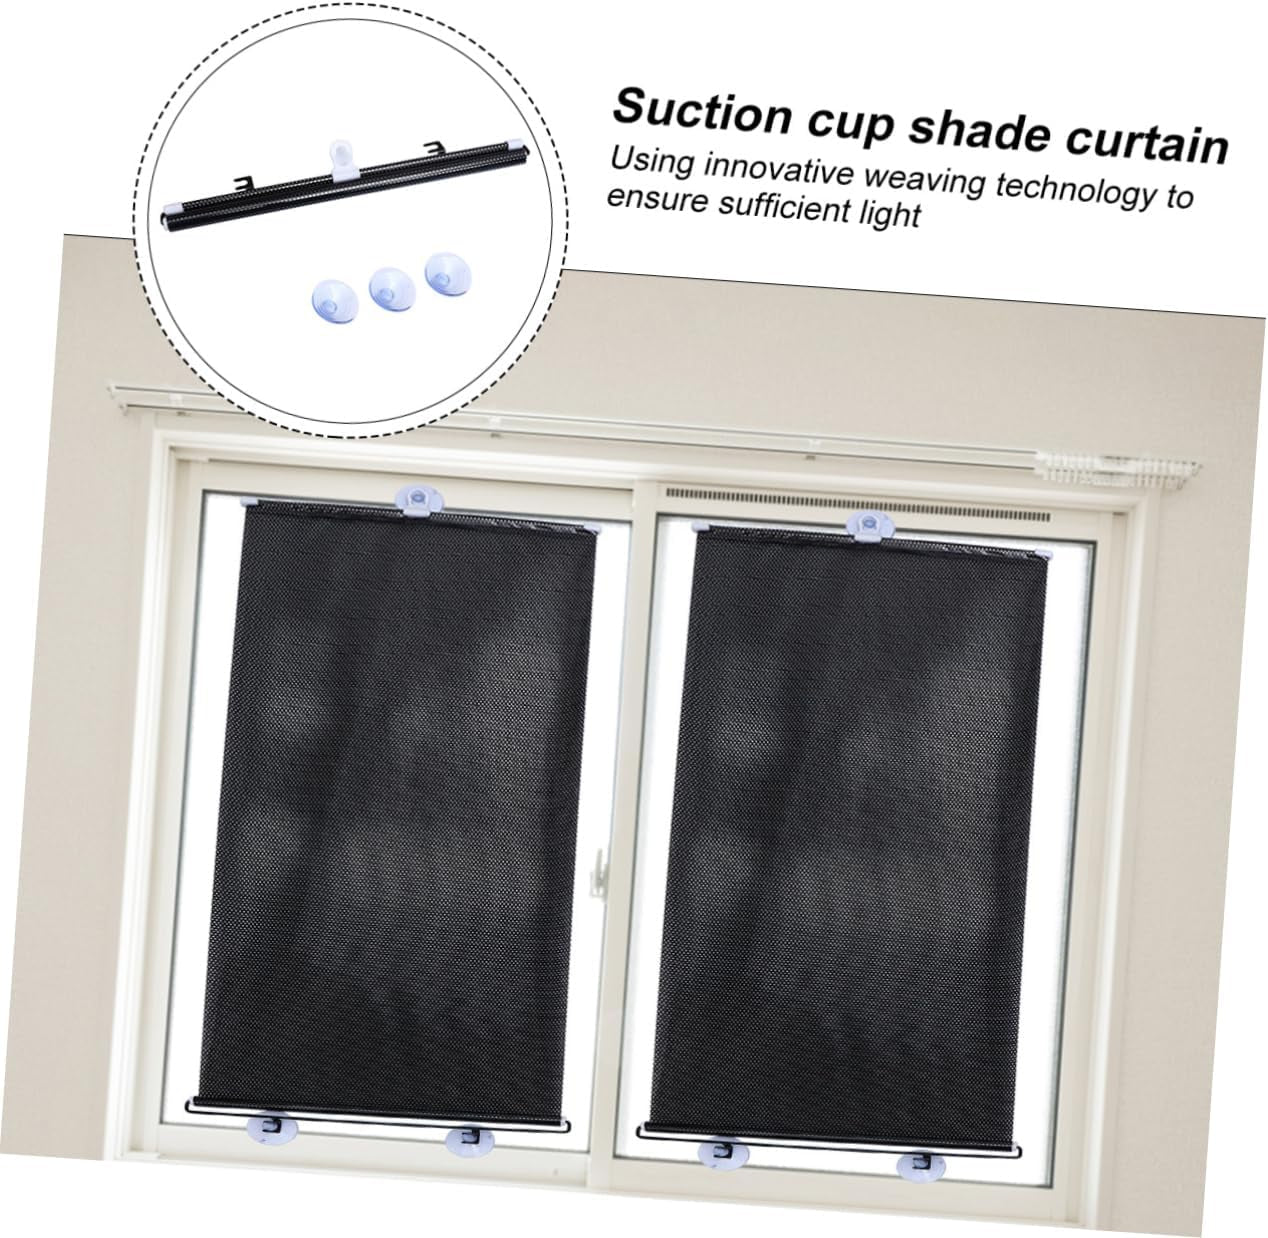 Artibetter Suction Cup Blinds Suction Cup Blackout Curtains Light Filtering Blinds Cordless Roller Shades Sun Blocking Curtains Balcony Suction Cup Sunshade Window Curtain Shade Roller